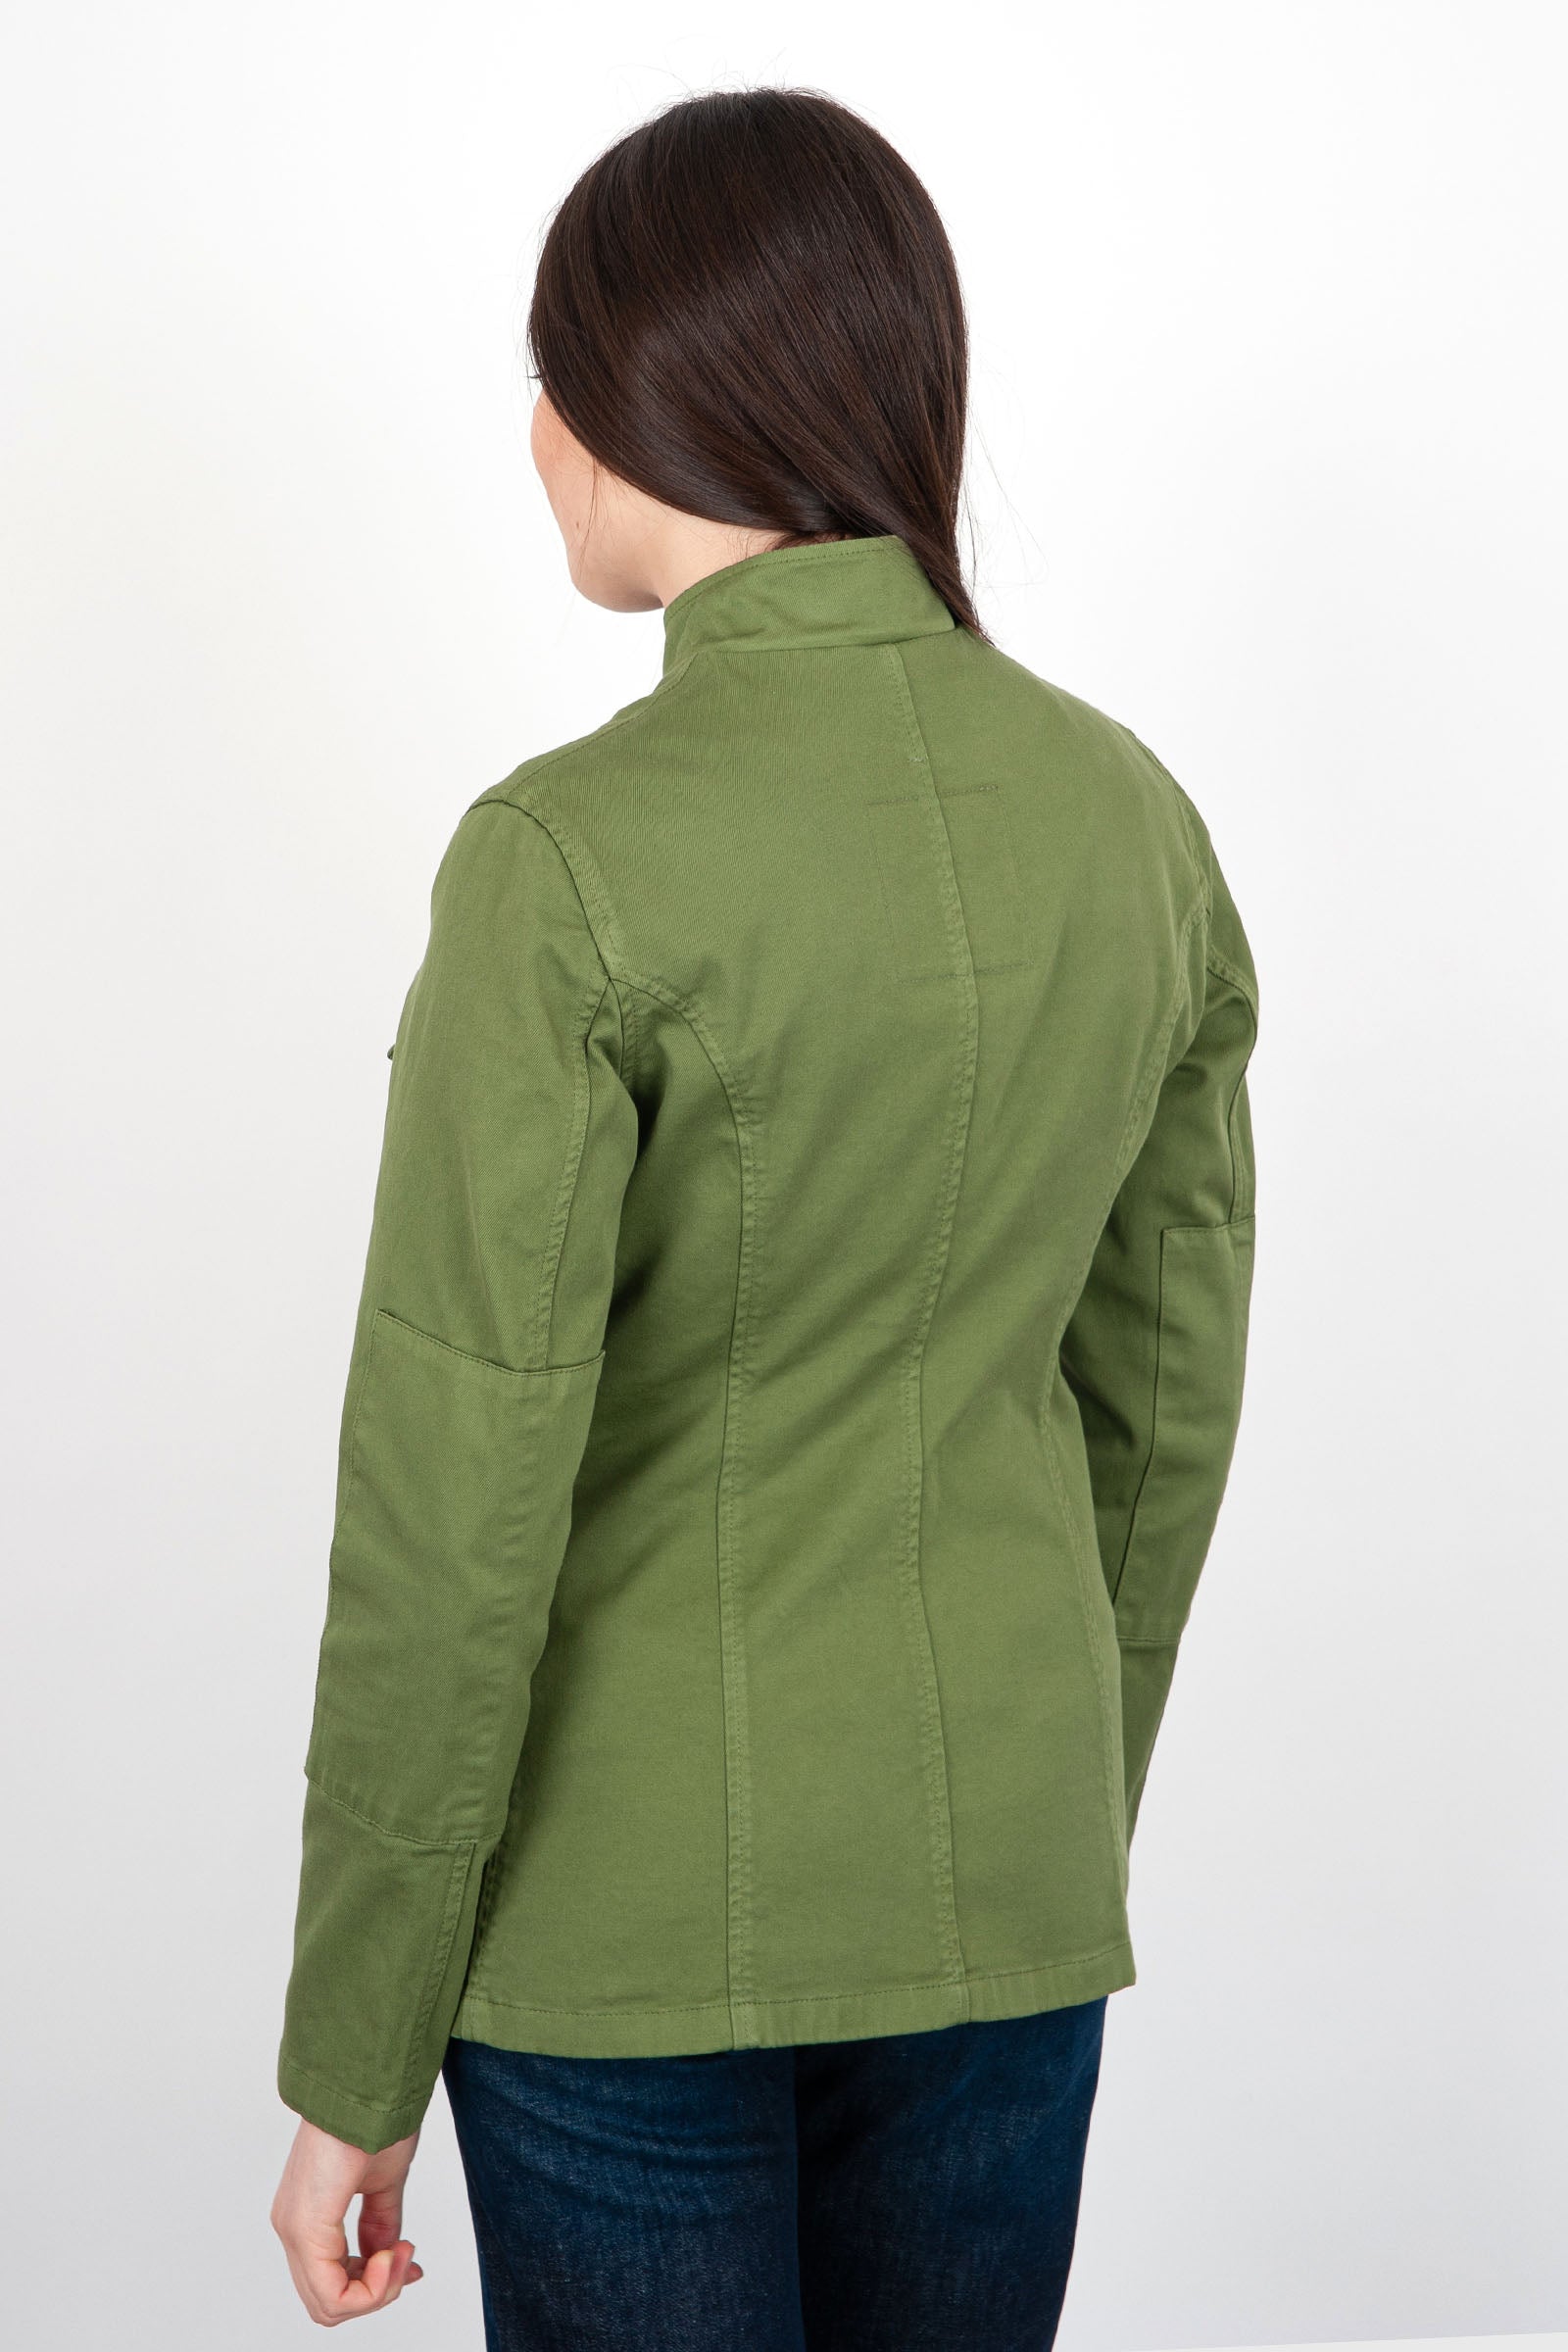 Department Five Green Military Cotton Field Jacket - 4